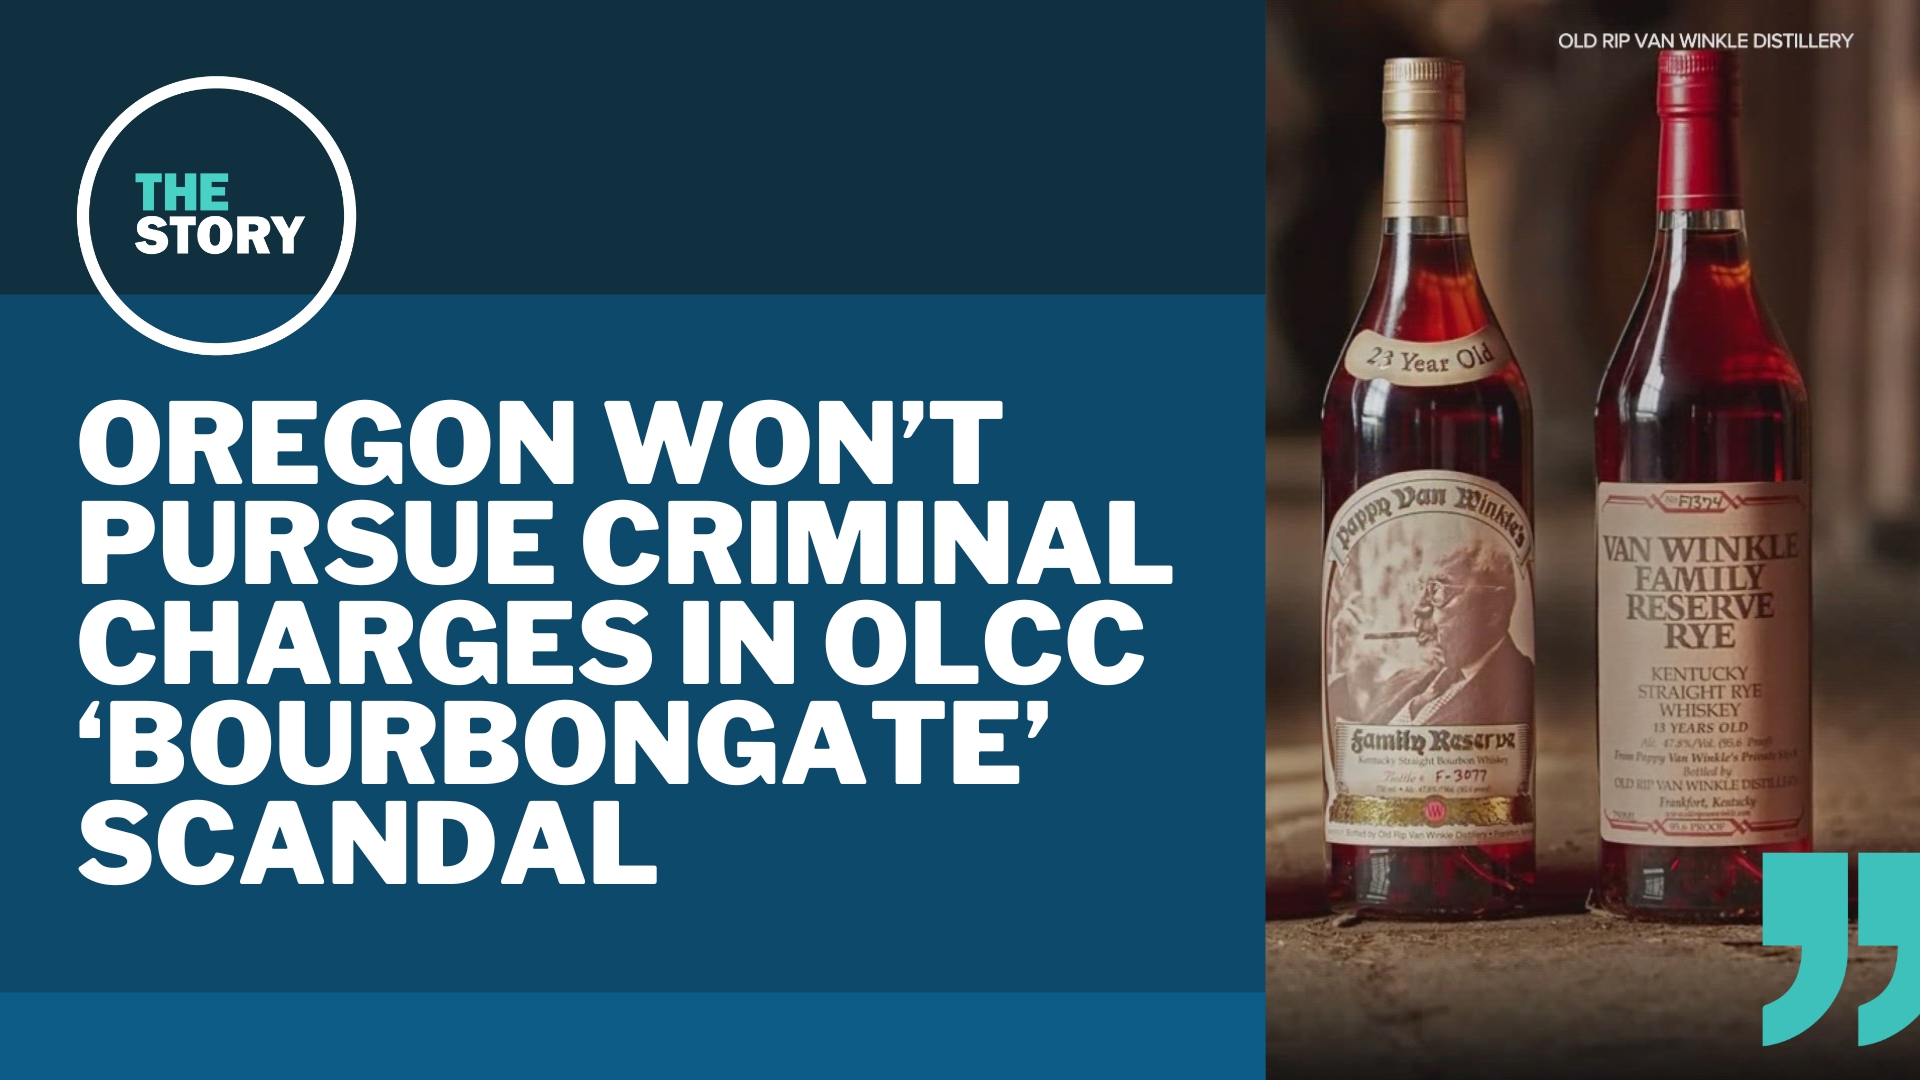 Top officials at the Oregon Liquor and Cannabis Commission were found to be buying up rare and sought-after bourbon before anyone in the public could.